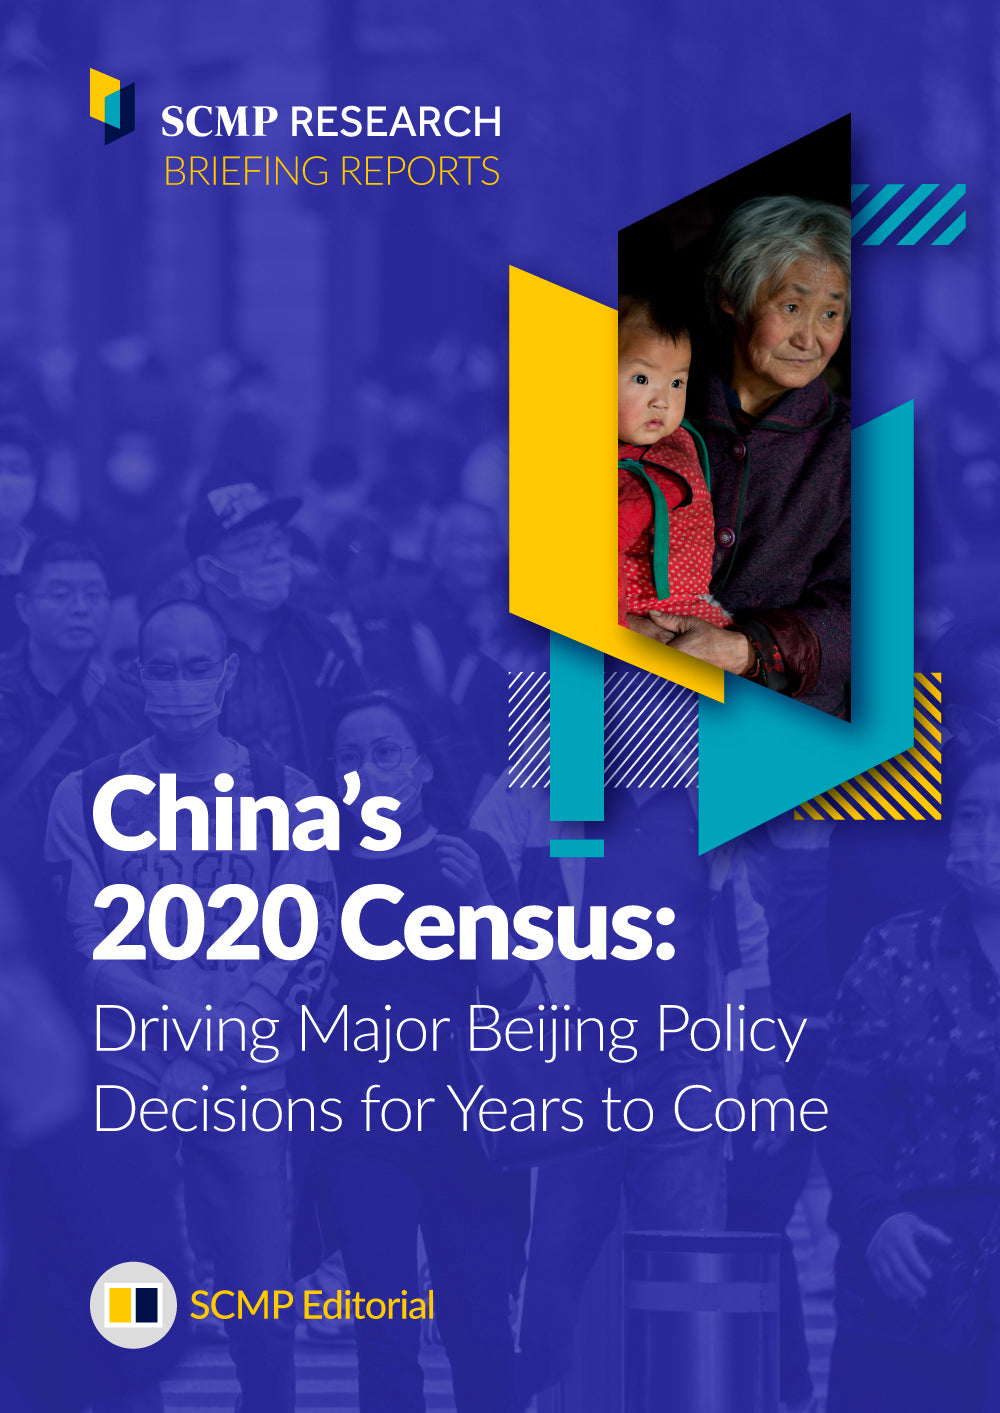 China’s 2020 Census Driving Major Beijing Policy Decisions for Years to Come